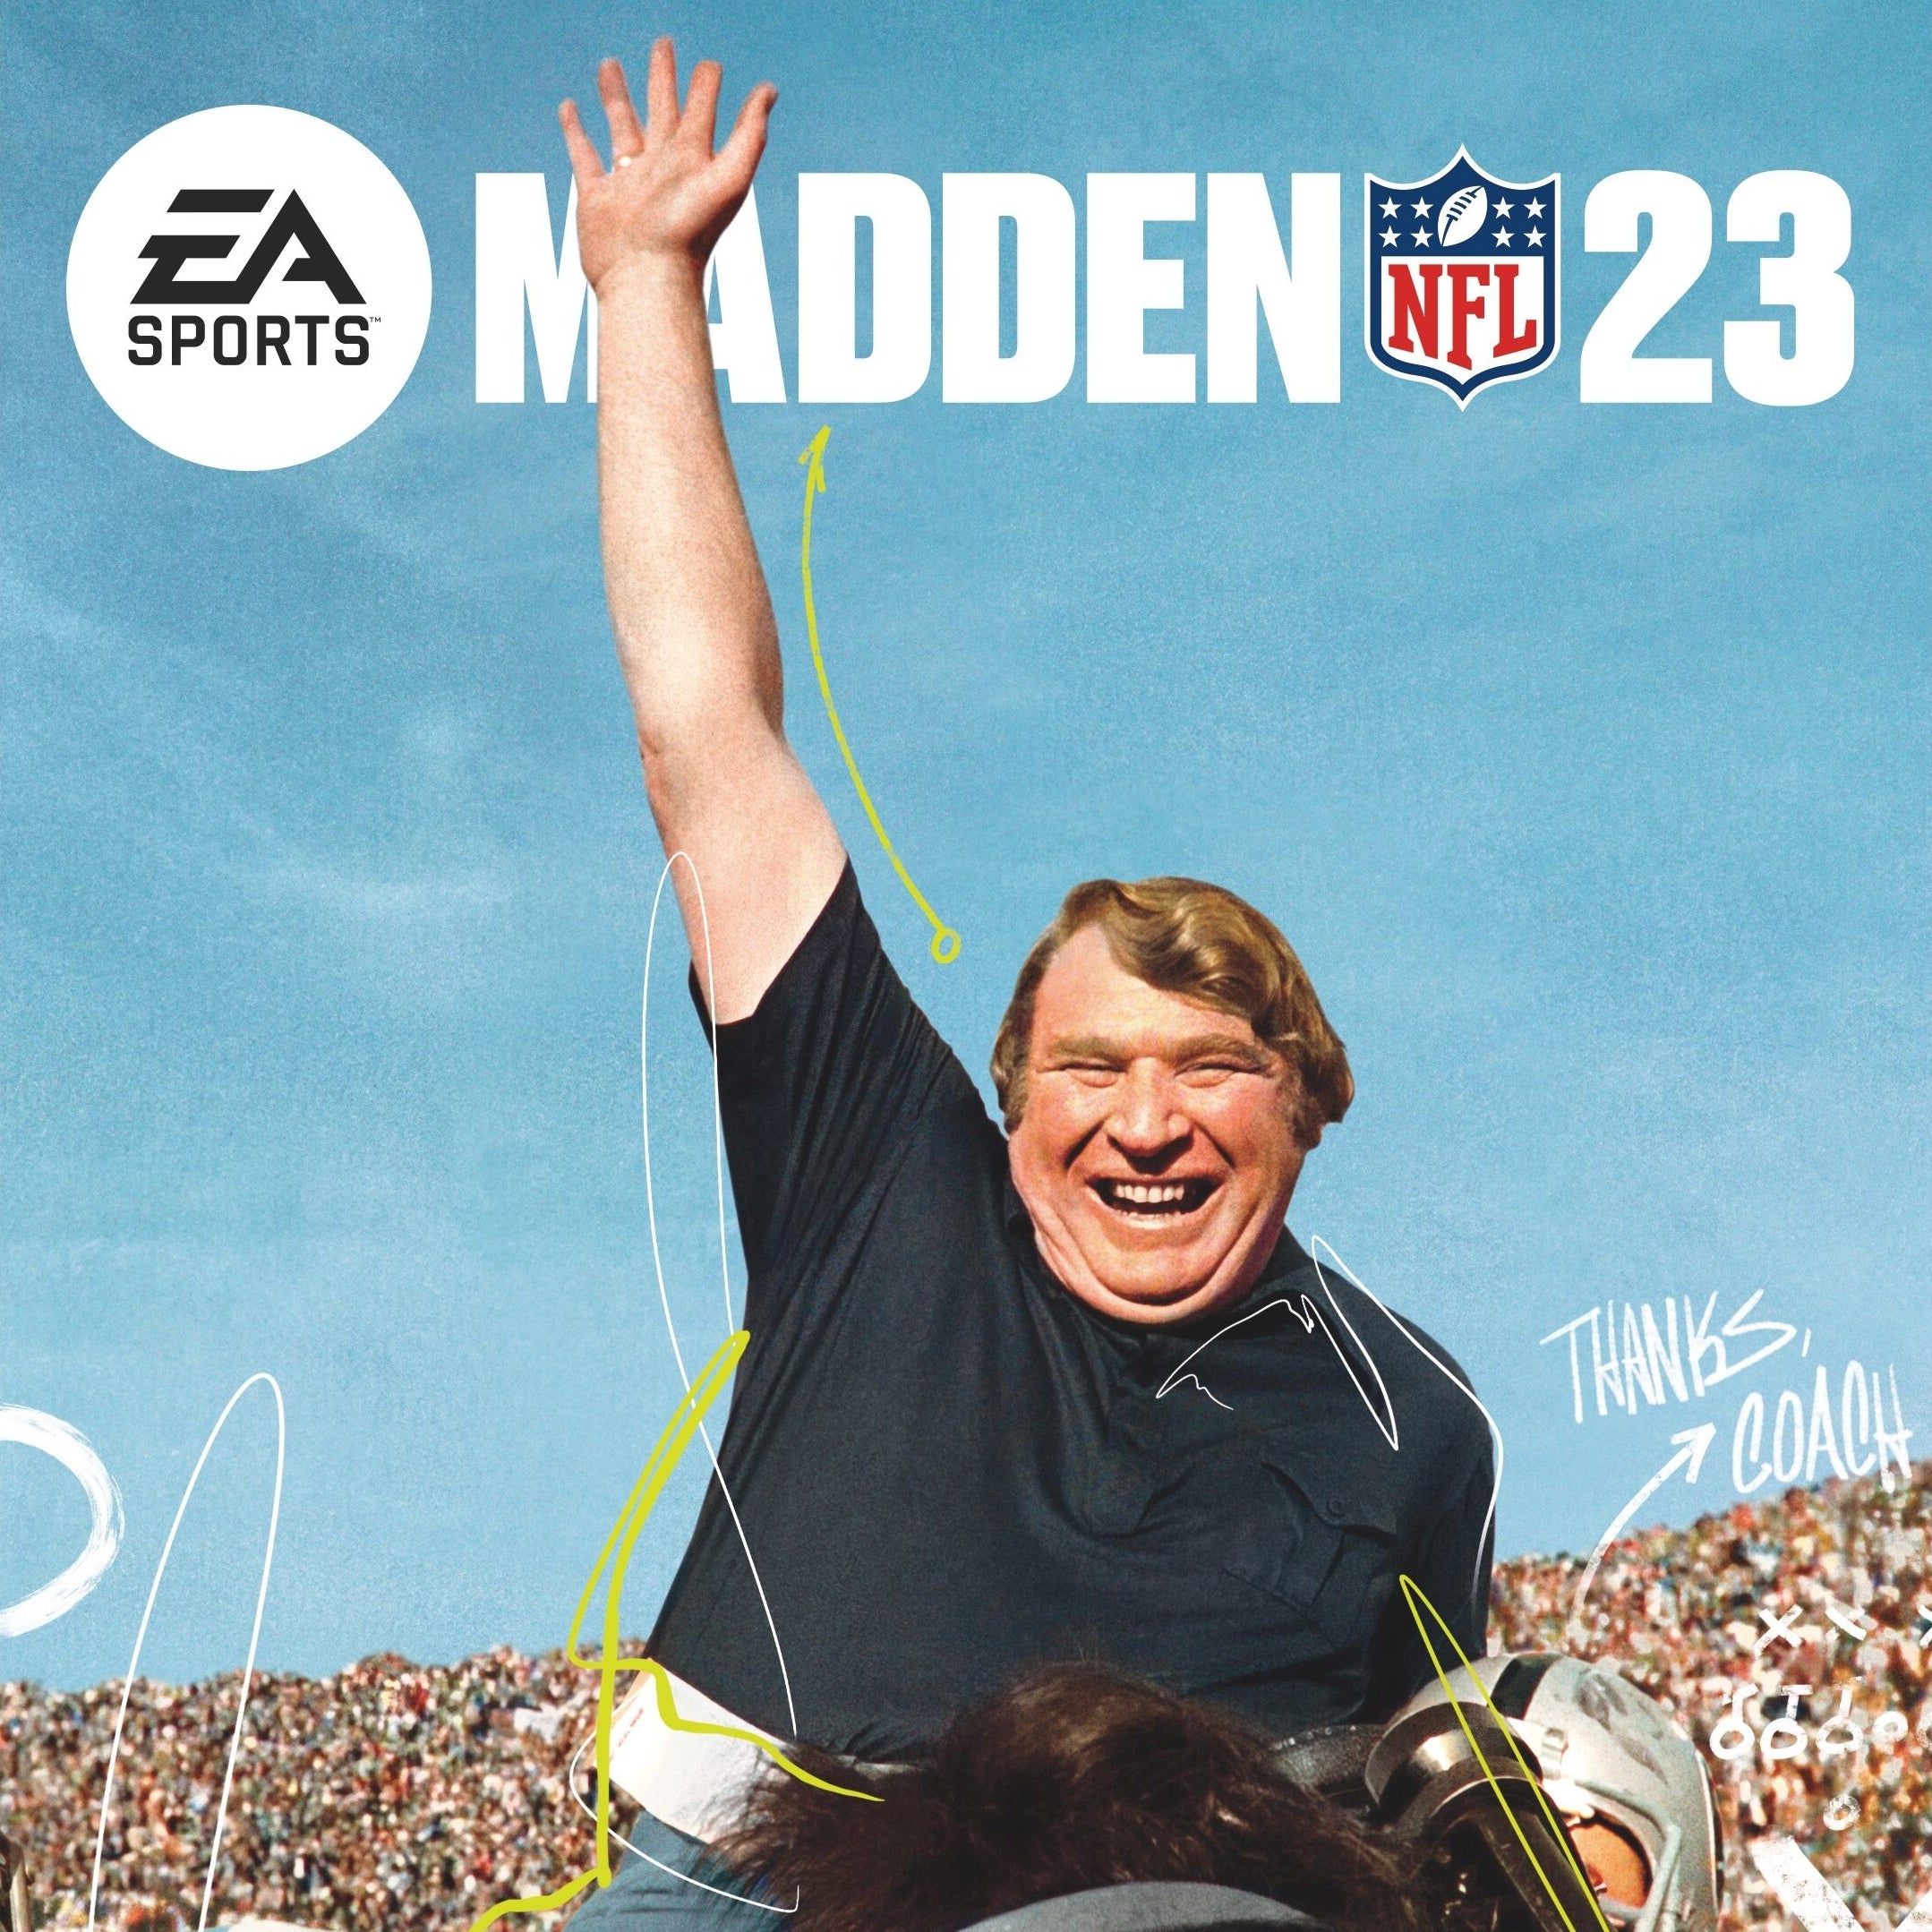 Will Madden 23 End The Streak of Bad Games?